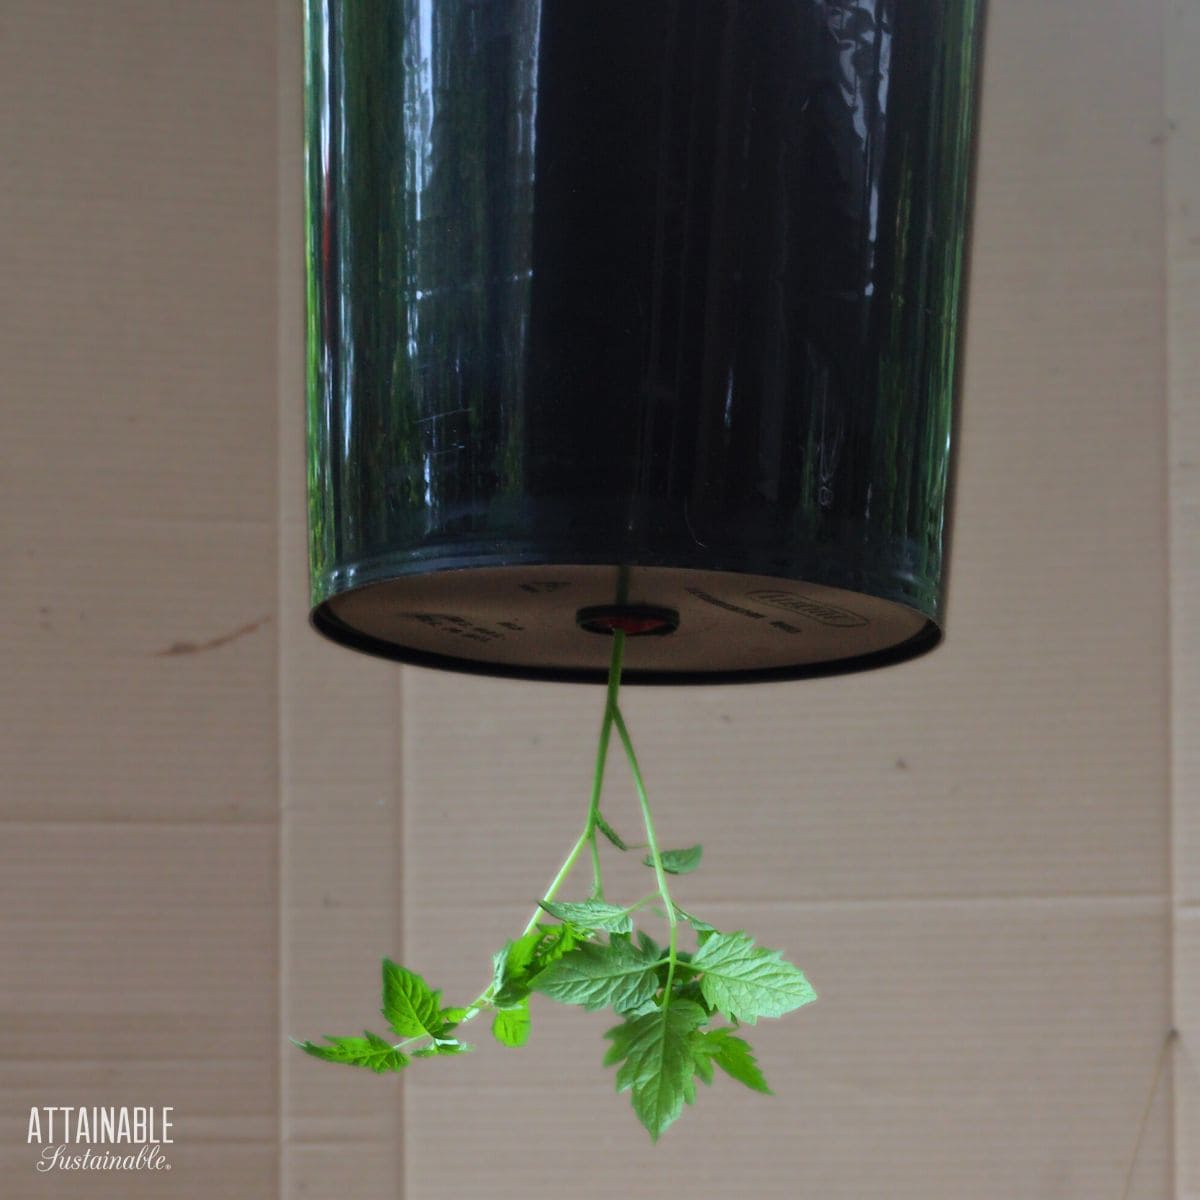 Black bucket with a tomato plant growing from a hole in the bottom.